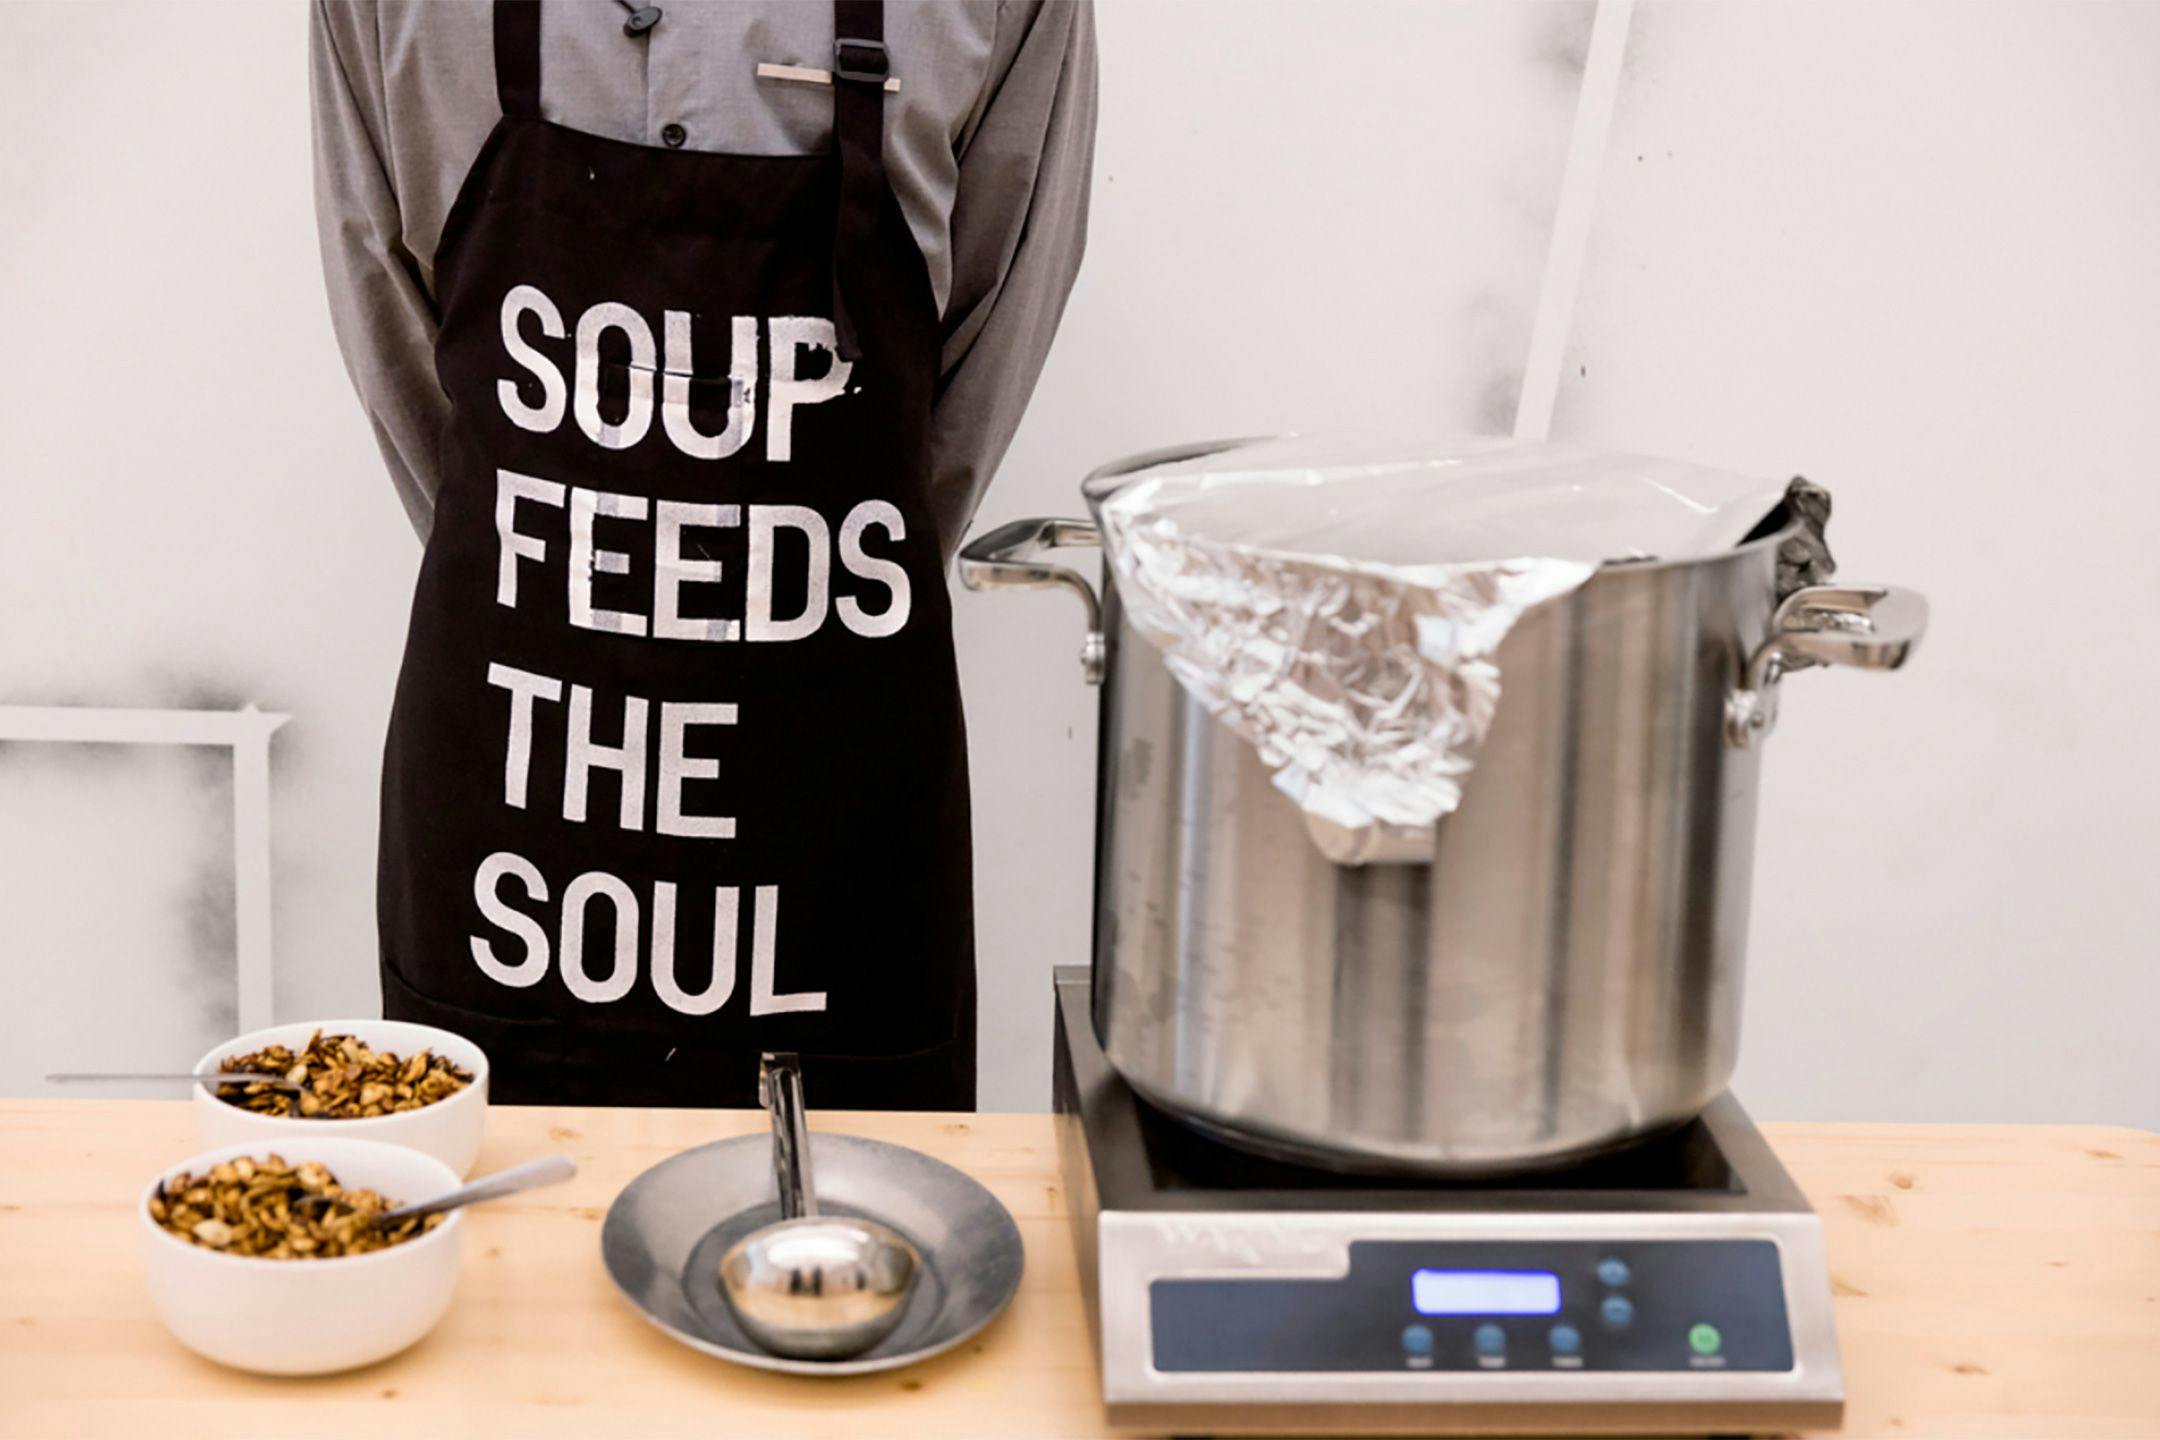 An installation view of food on display within the exhibition Fear eats the soul at Glenstone, dated 2019 to 2020.